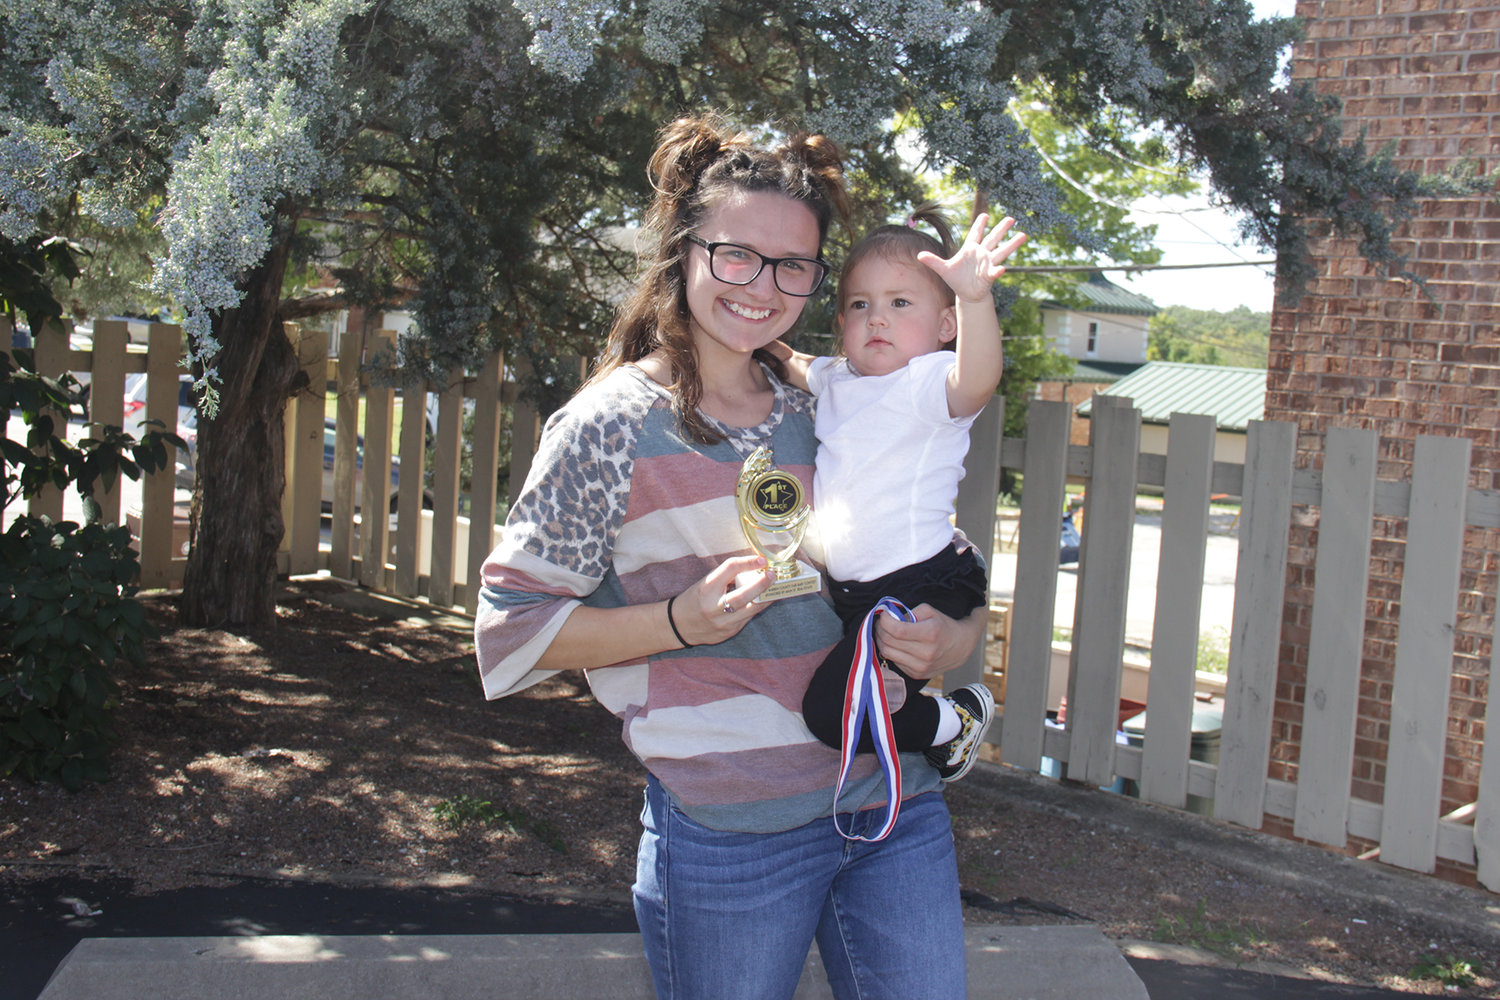 BABY CONTEST 19-24 MONTHS — First place: Aleigha Hafner, held by Abby Thomas.